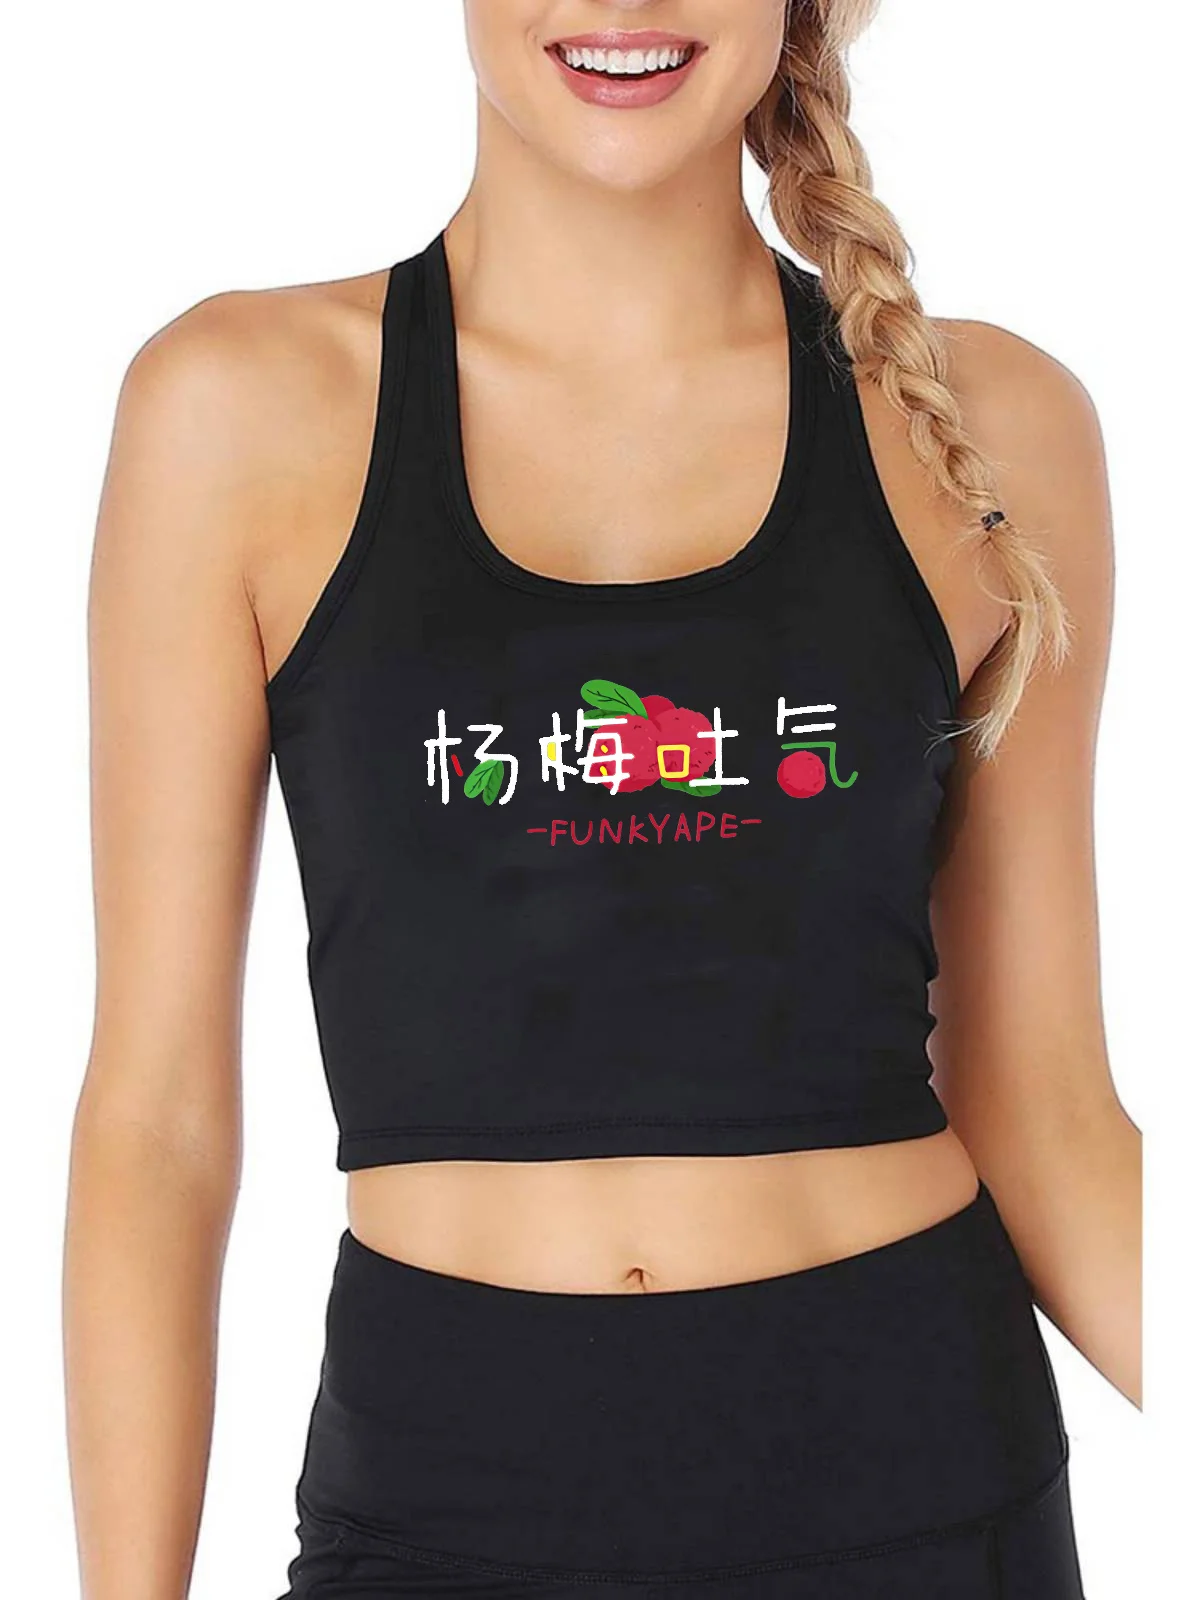 

Amusing Chinese Idioms Design Breathable Slim Fit Tank Top Women's Yoga Sport Crop Tops Gym Vest Summer Camisole